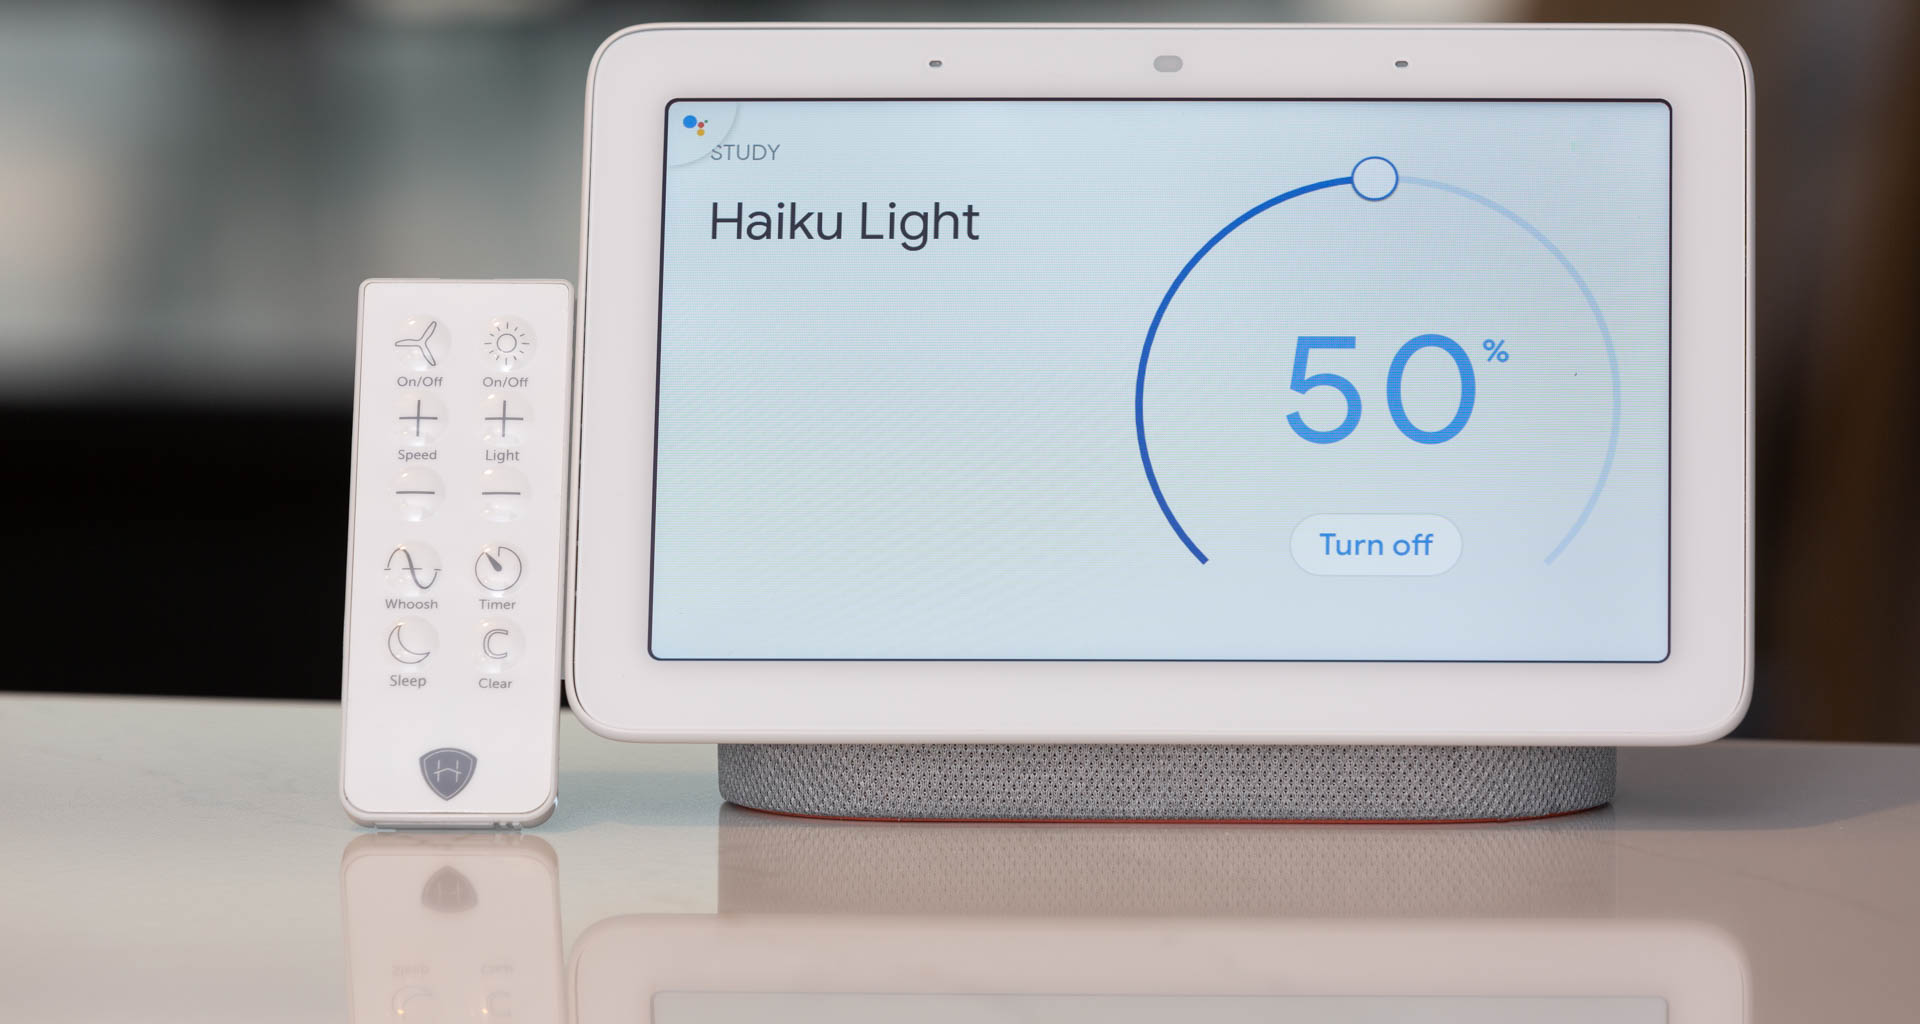 With a Google Home Hub or from the Google Home app, Haiku lights can be controlled with screen gestures. Image: Digitized House Media.